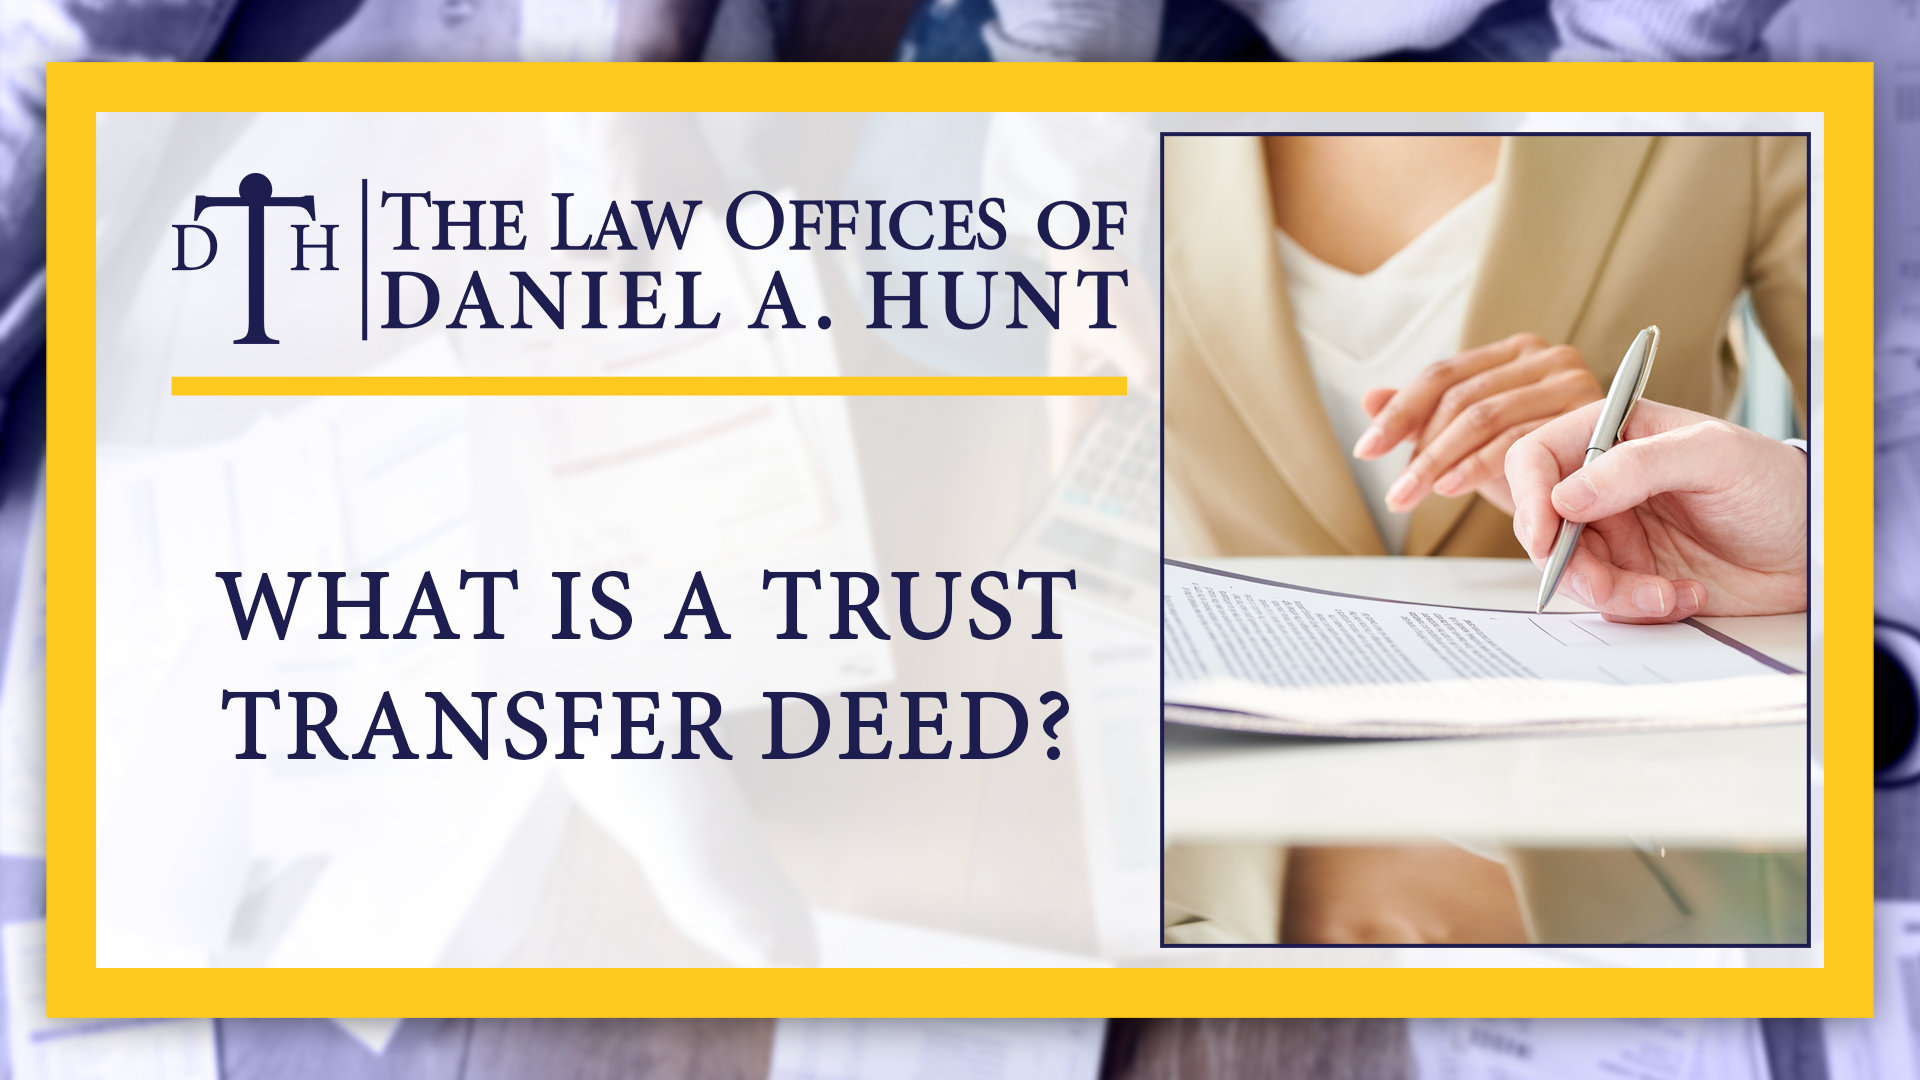 What is a trust transfer deed?